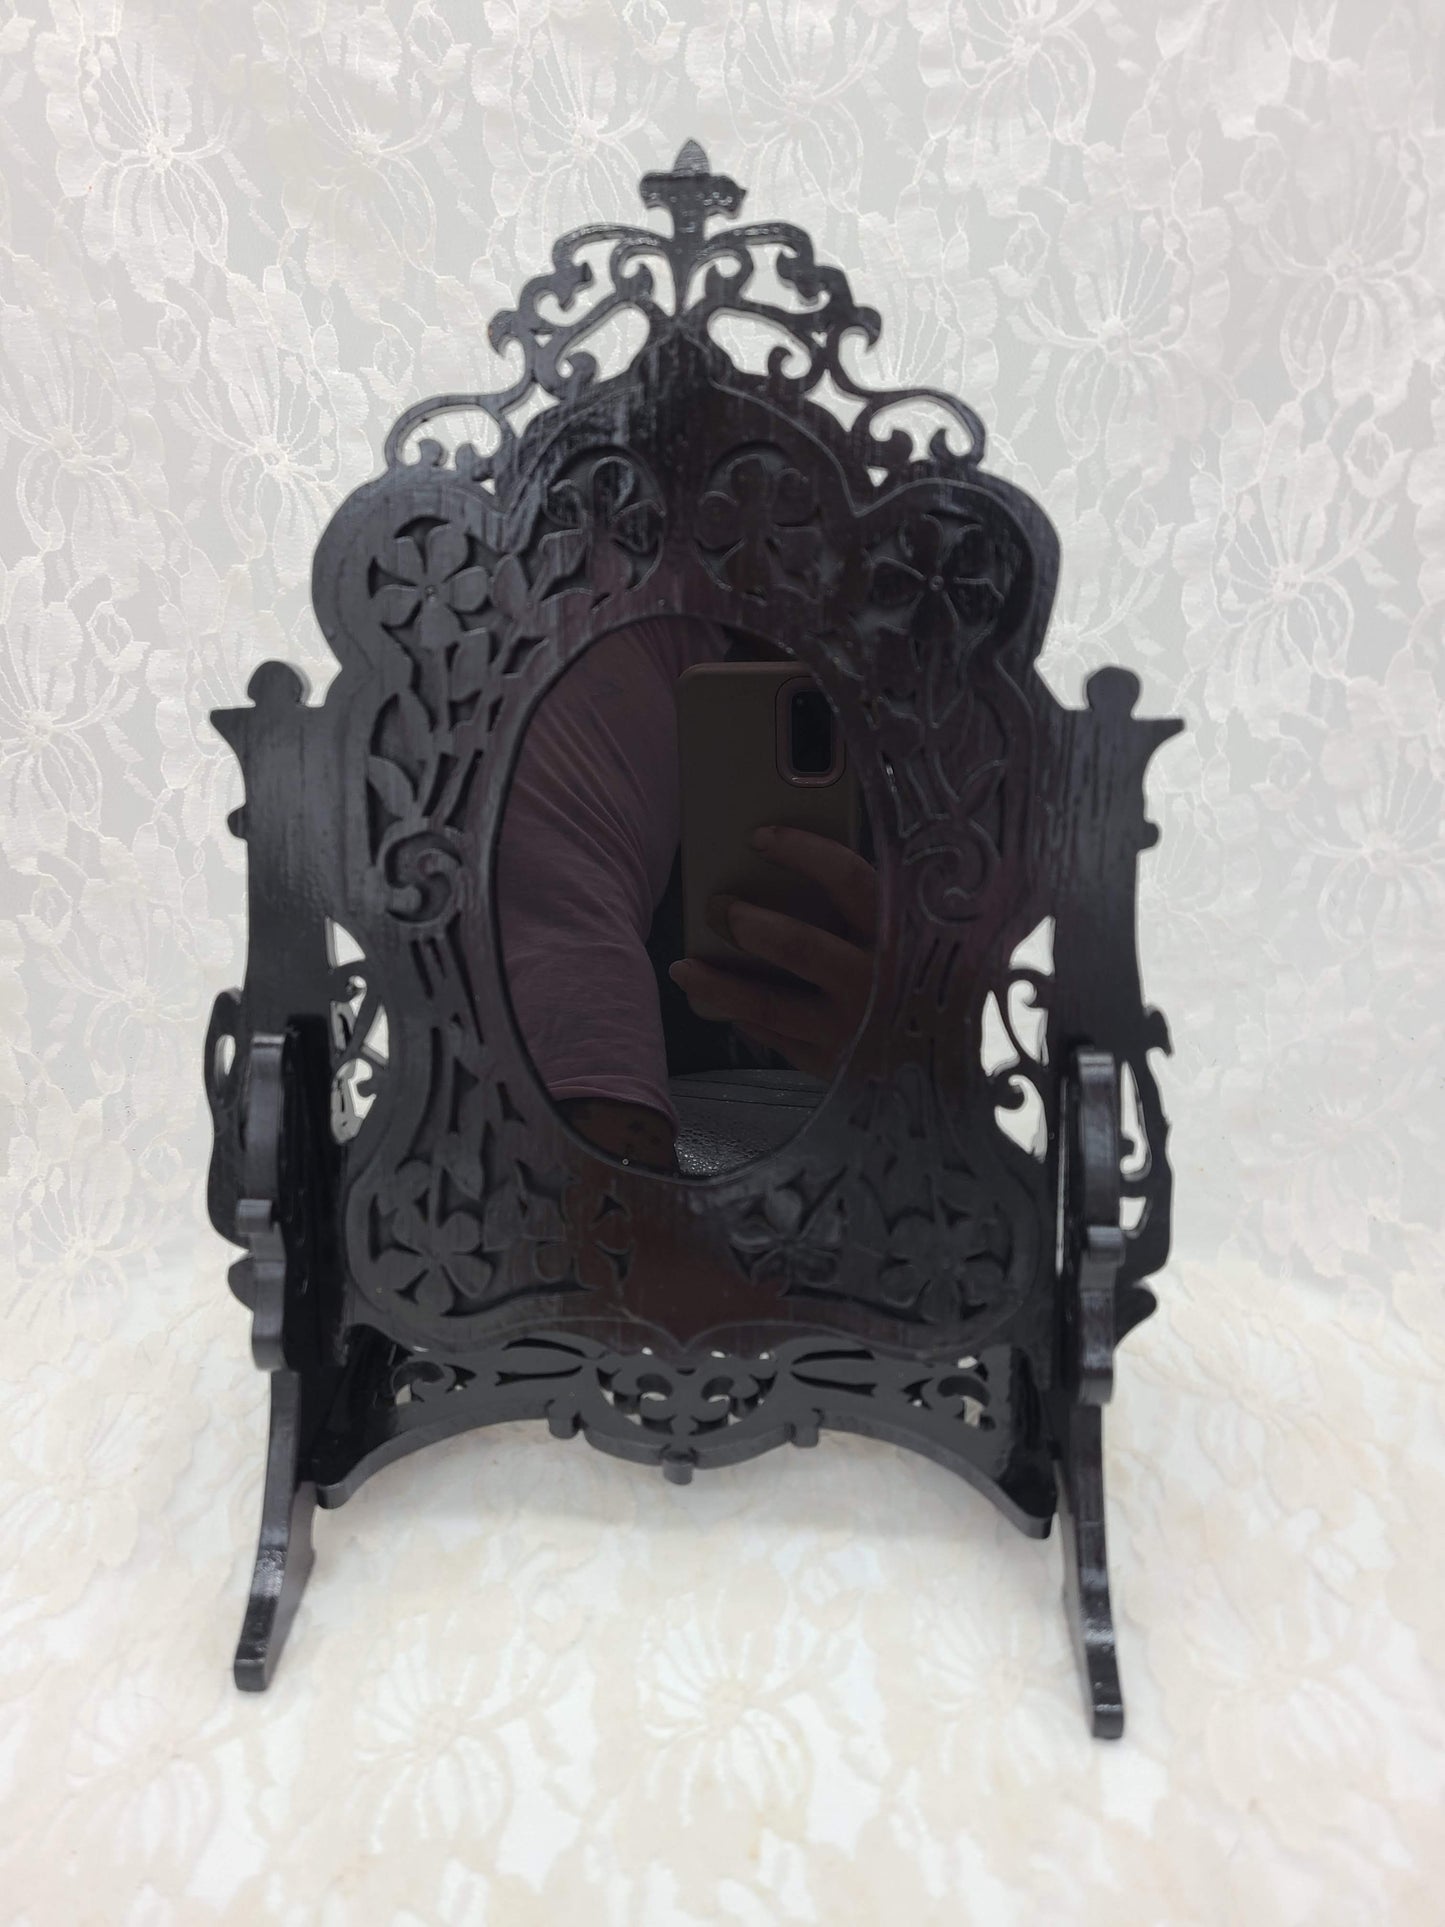 Handmade DIY BLACK GLASS Scrying Mirror 12" by 8" Freestanding Hand Hewn Wood Antique Glass ~ Witchy ~ Divination